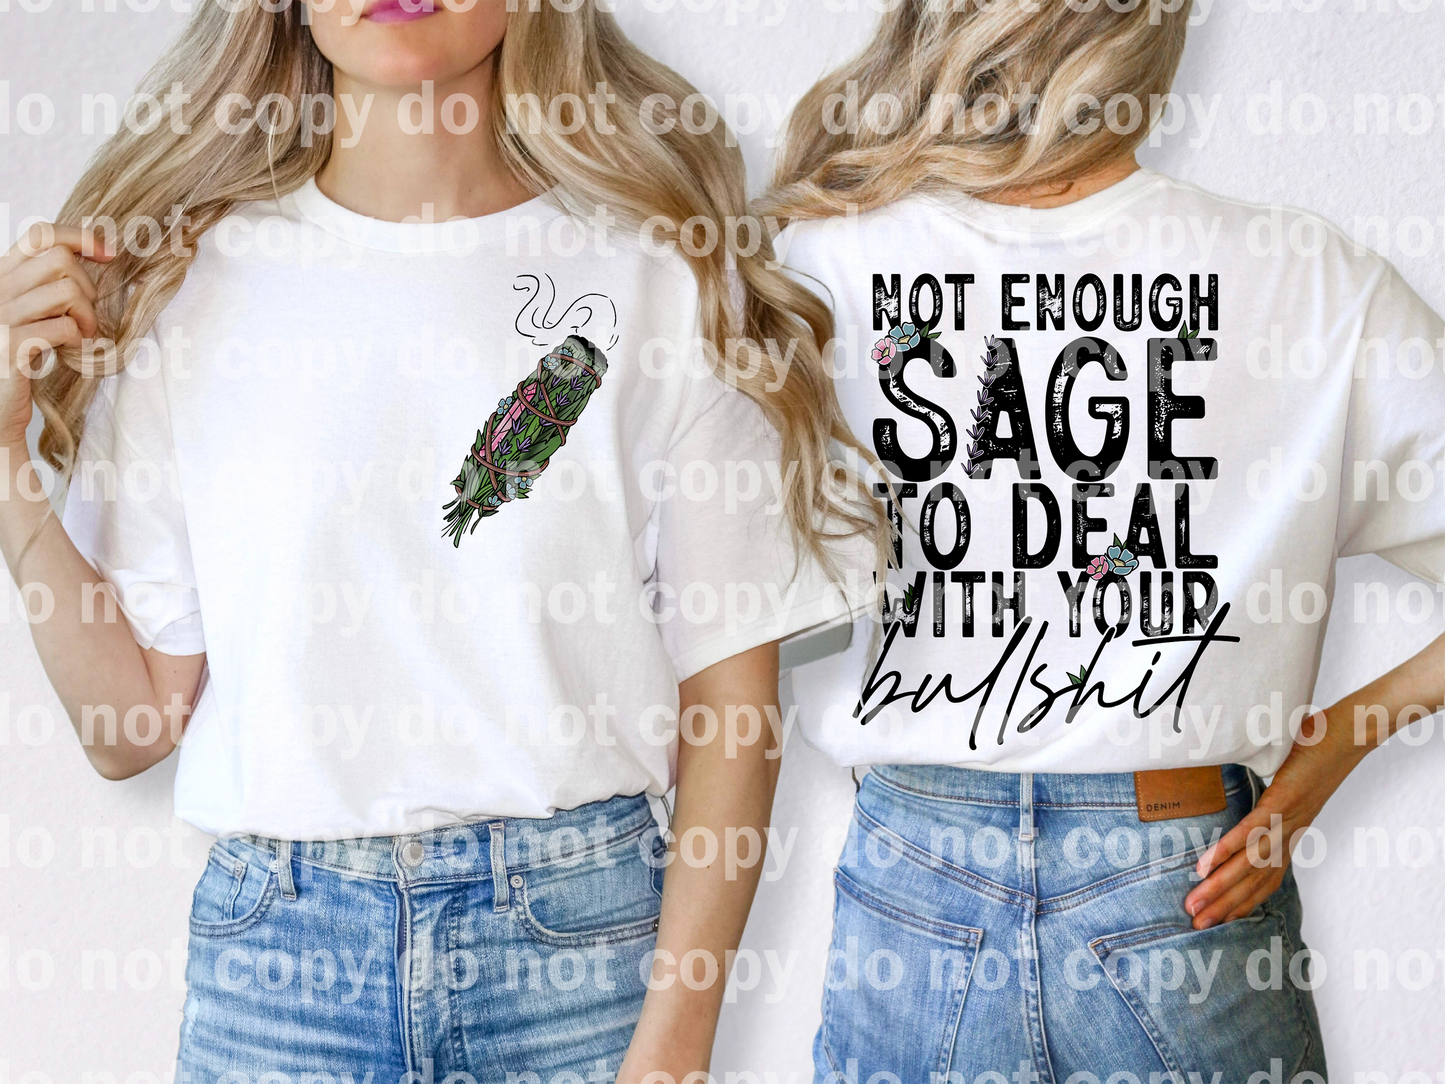 Not Enough Sage To Deal With Your Bullshit with Pocket Option Dream Print or Sublimation Print